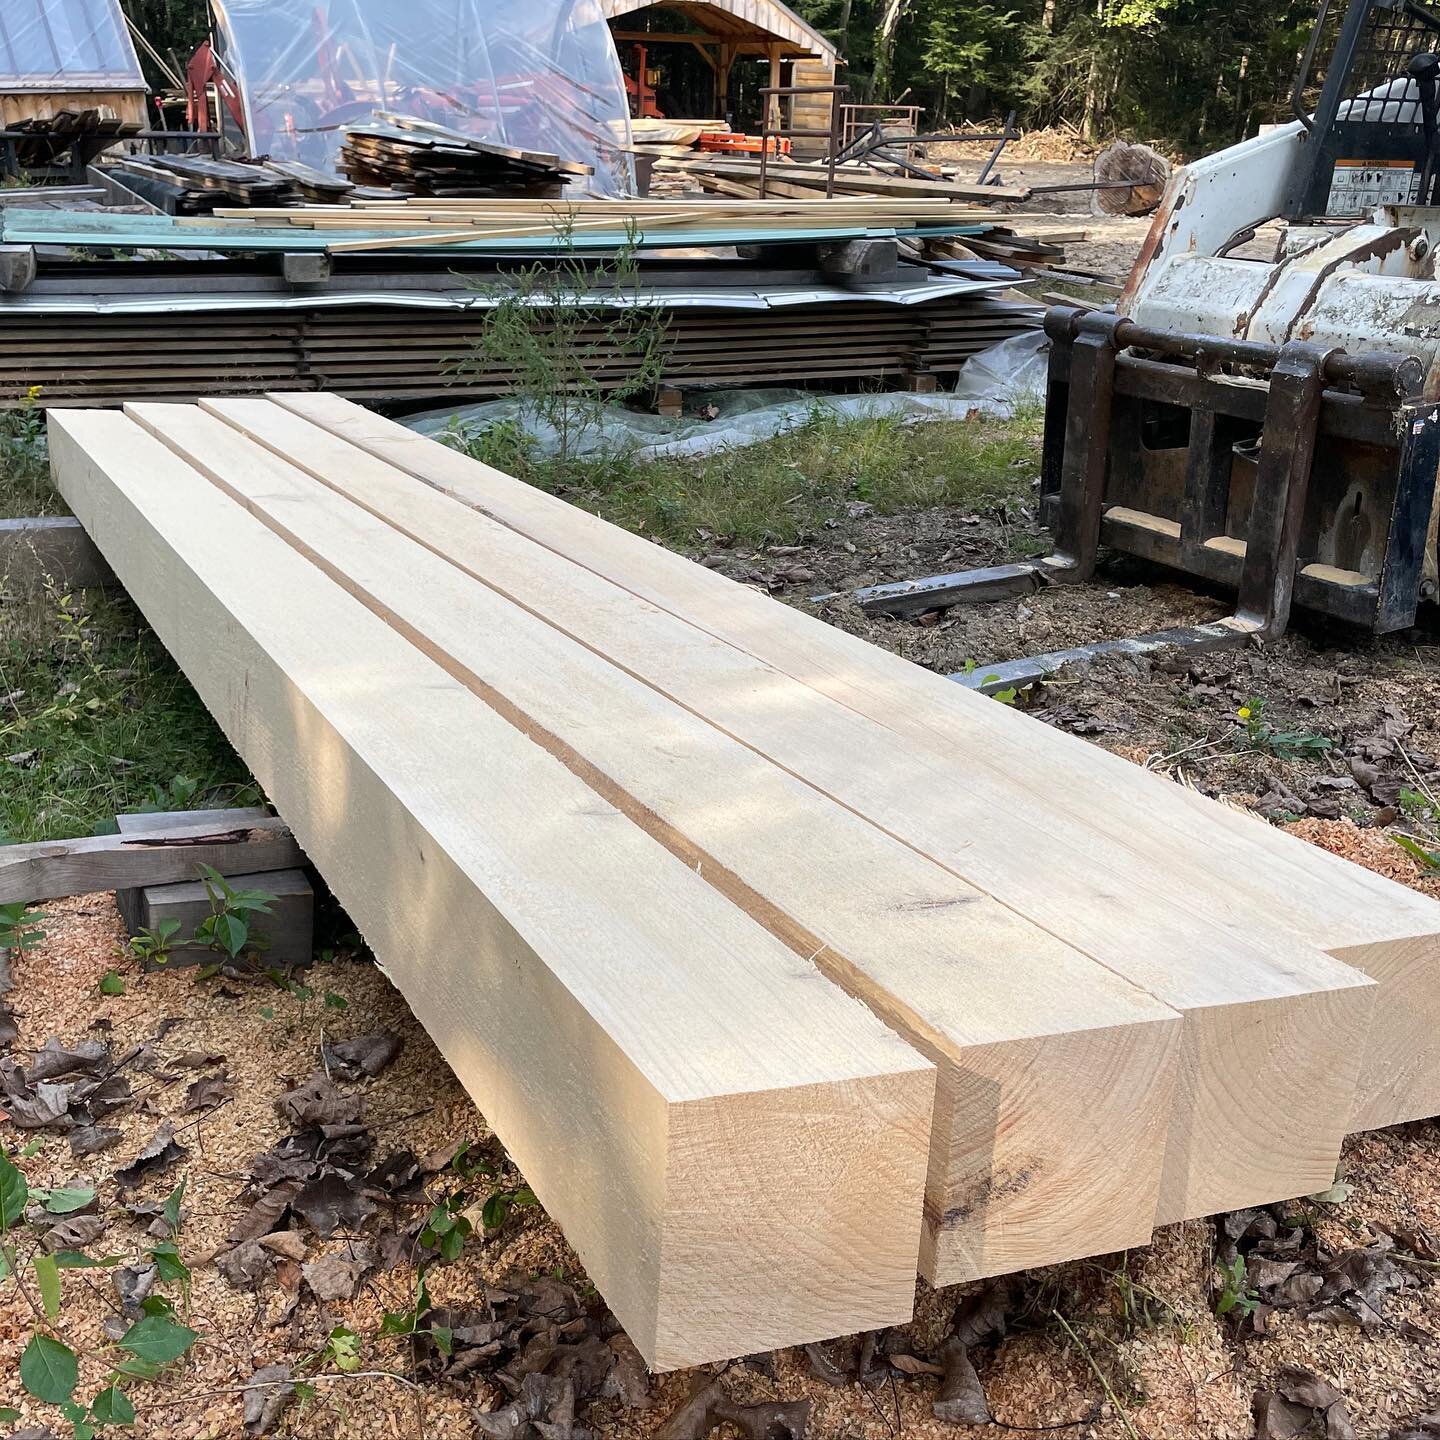 The sawyer, Nate, sent me a few pictures of timber we&rsquo;ll use for our next project. I&rsquo;m salivating.